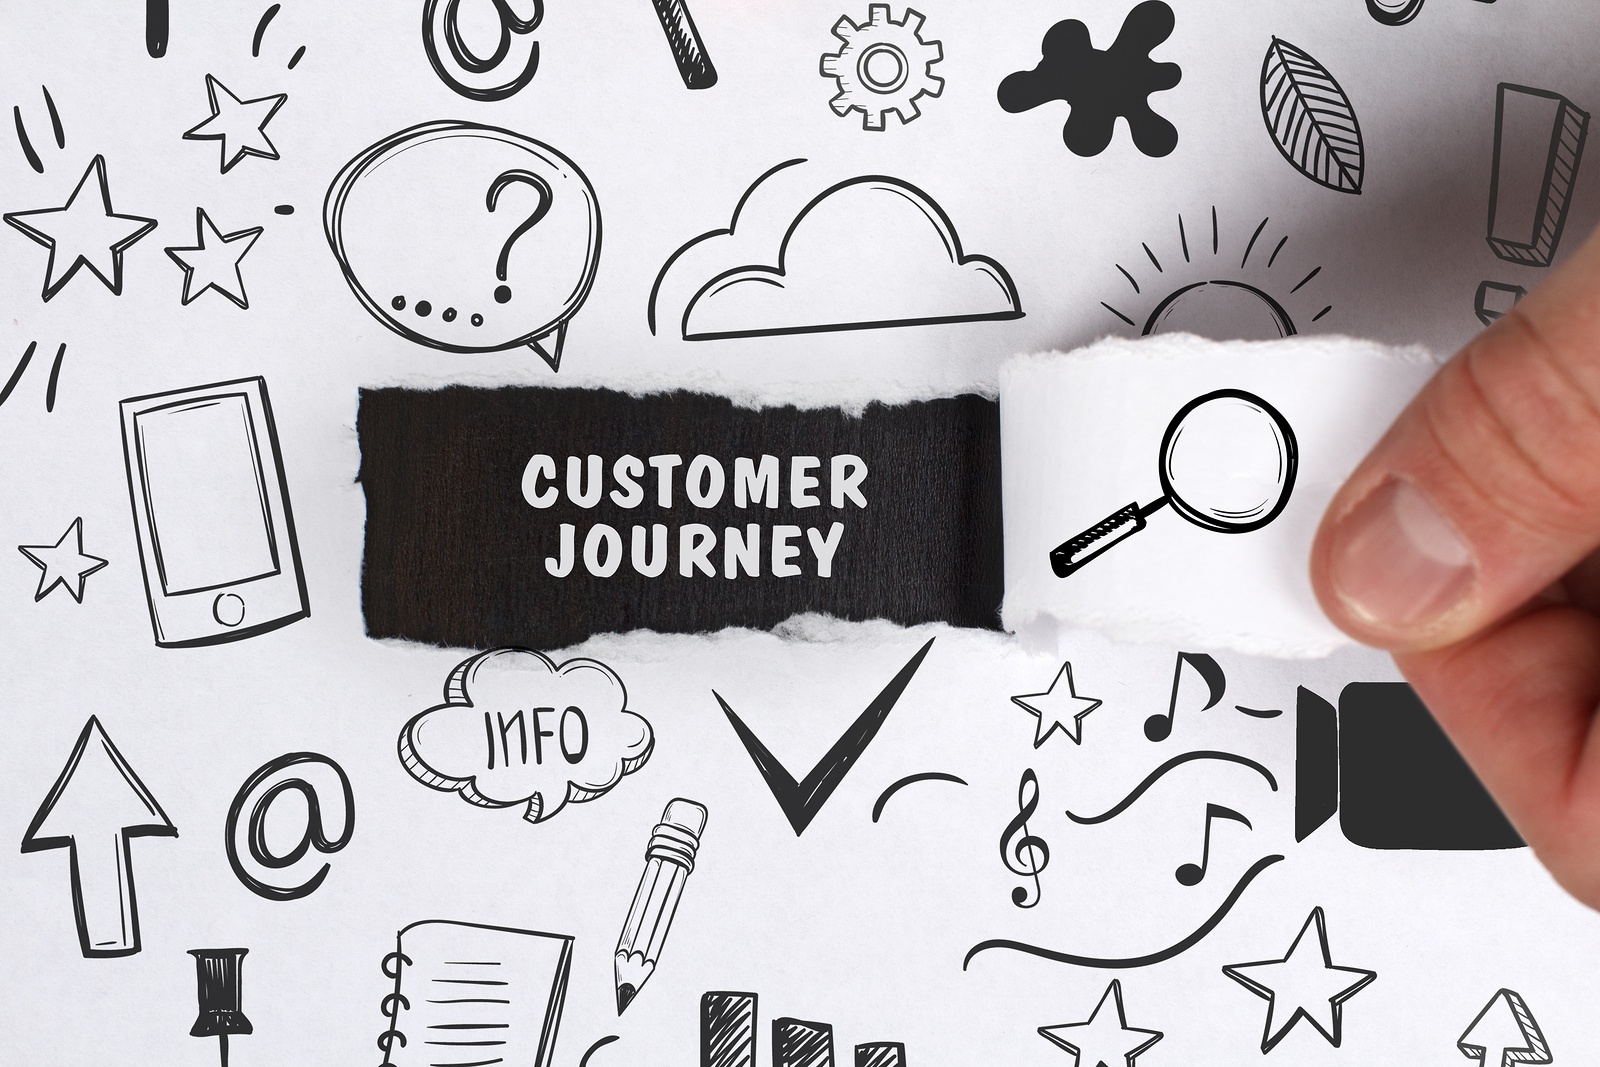 Thinking Beyond the Purchase: Mapping content to the customer’s buying journey